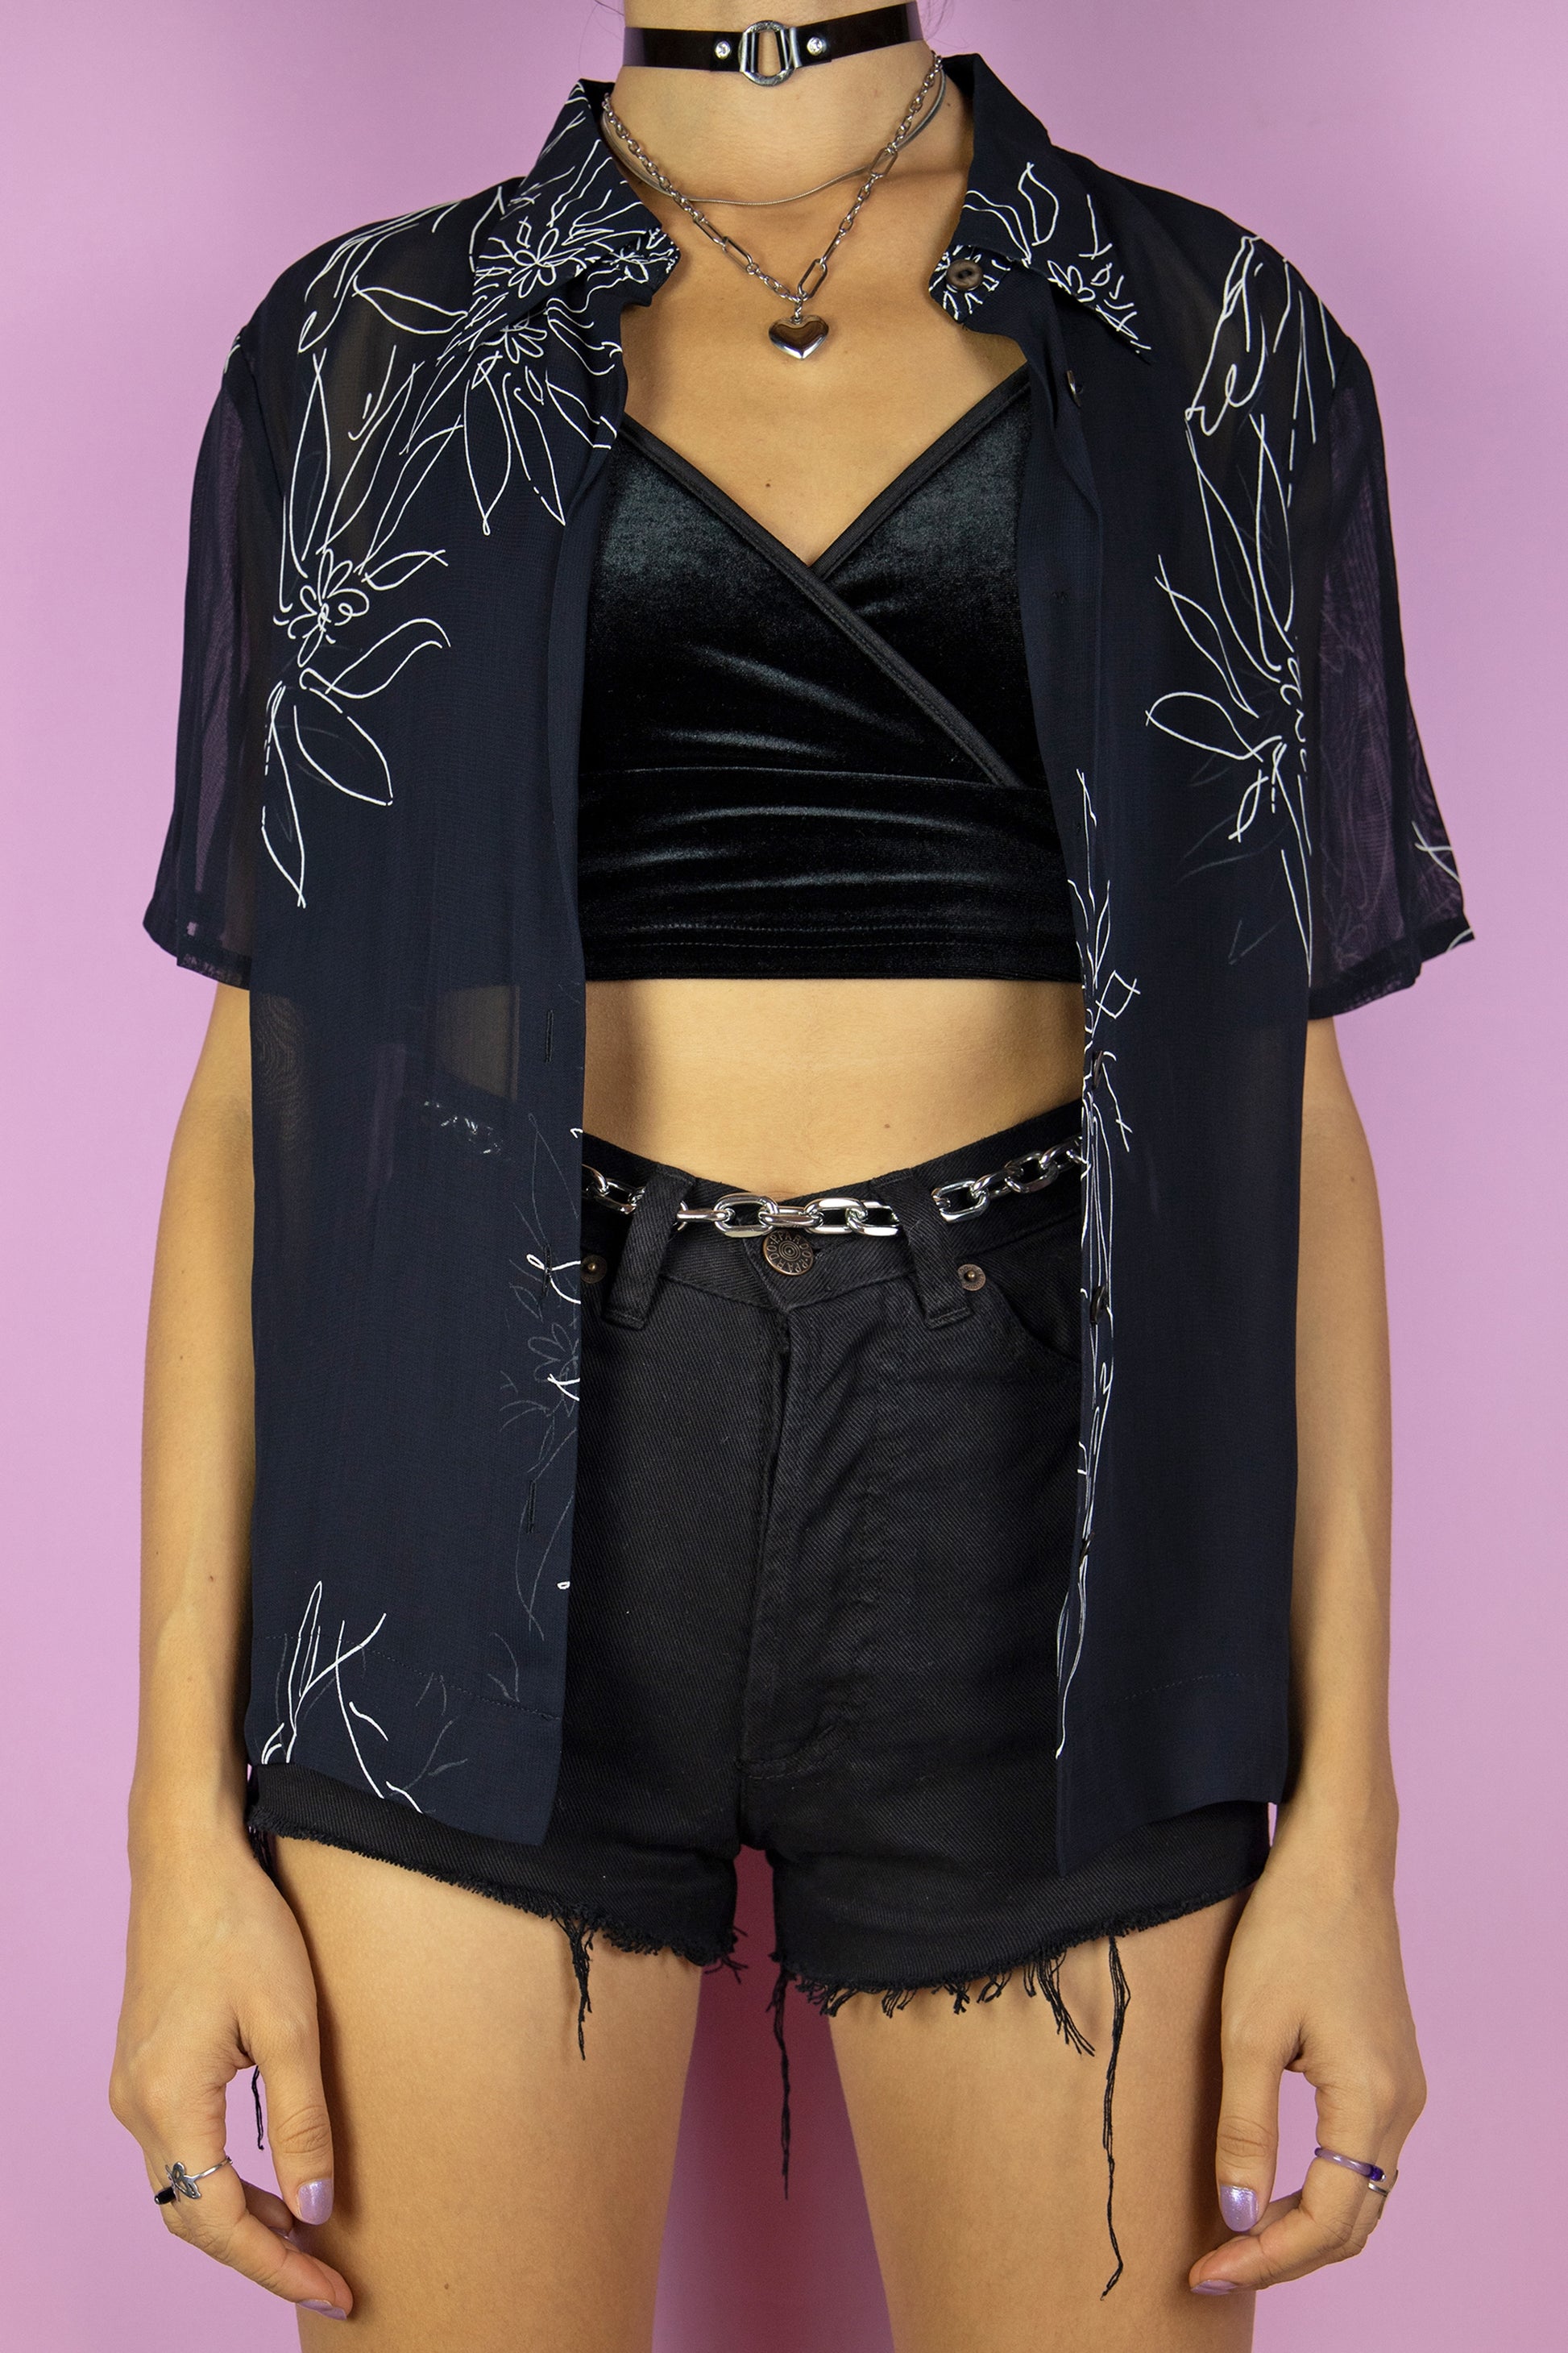 The Vintage 90s Boho Black Sheer Blouse is a short sleeve semi-sheer black top with a collar, buttons and white floral pattern. Summer 1990s shirt.